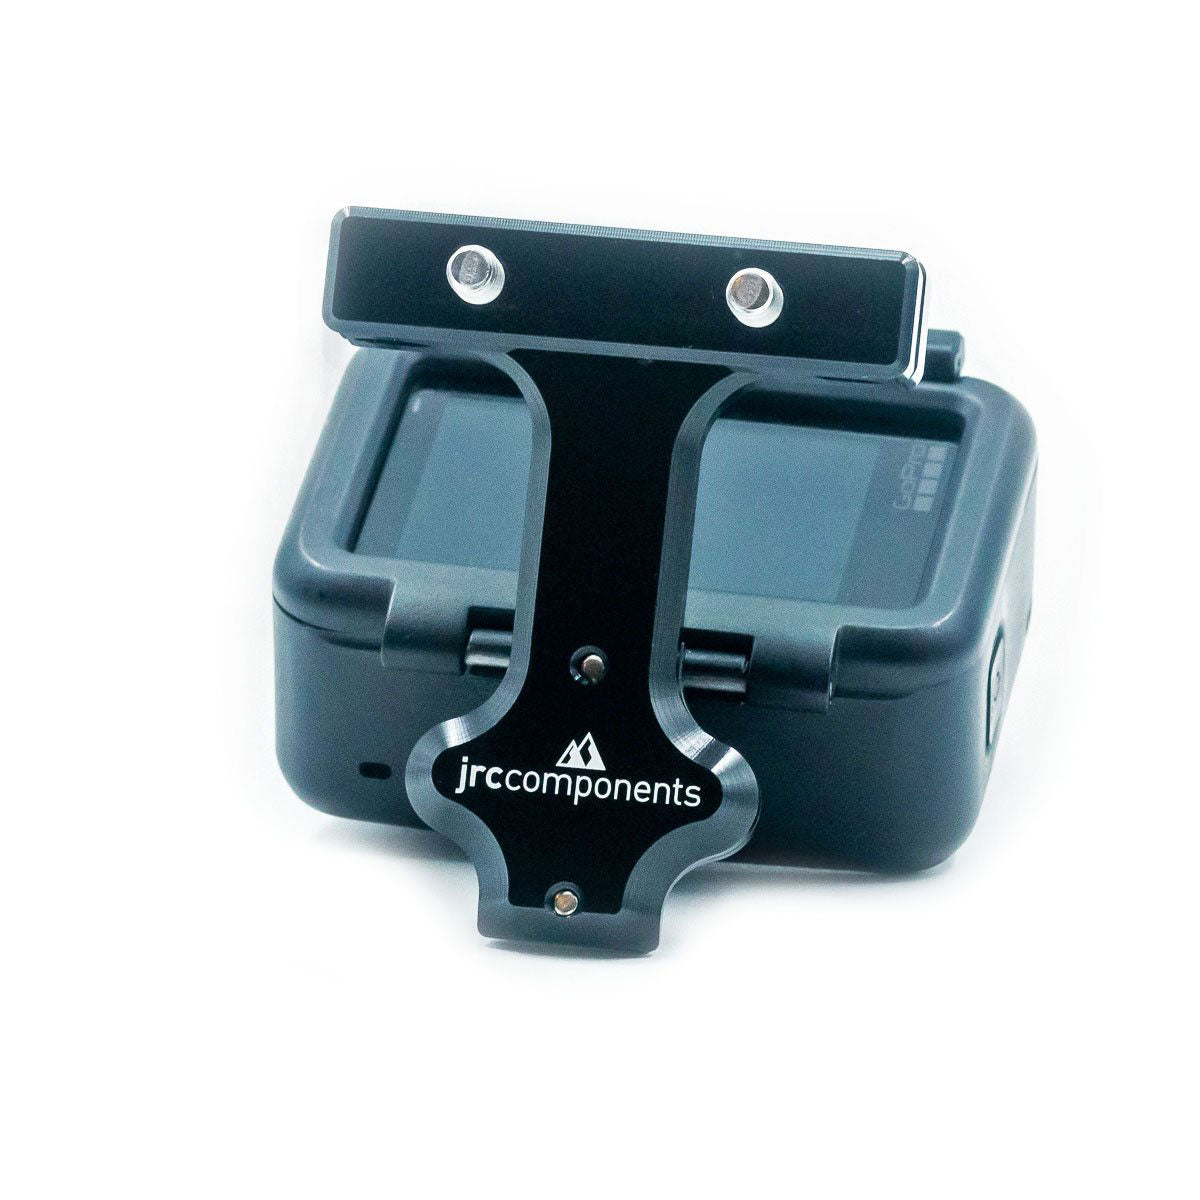 Black saddle rail mount with adaptor piece for rear lights and action cameras, with GoPro attached, front view.